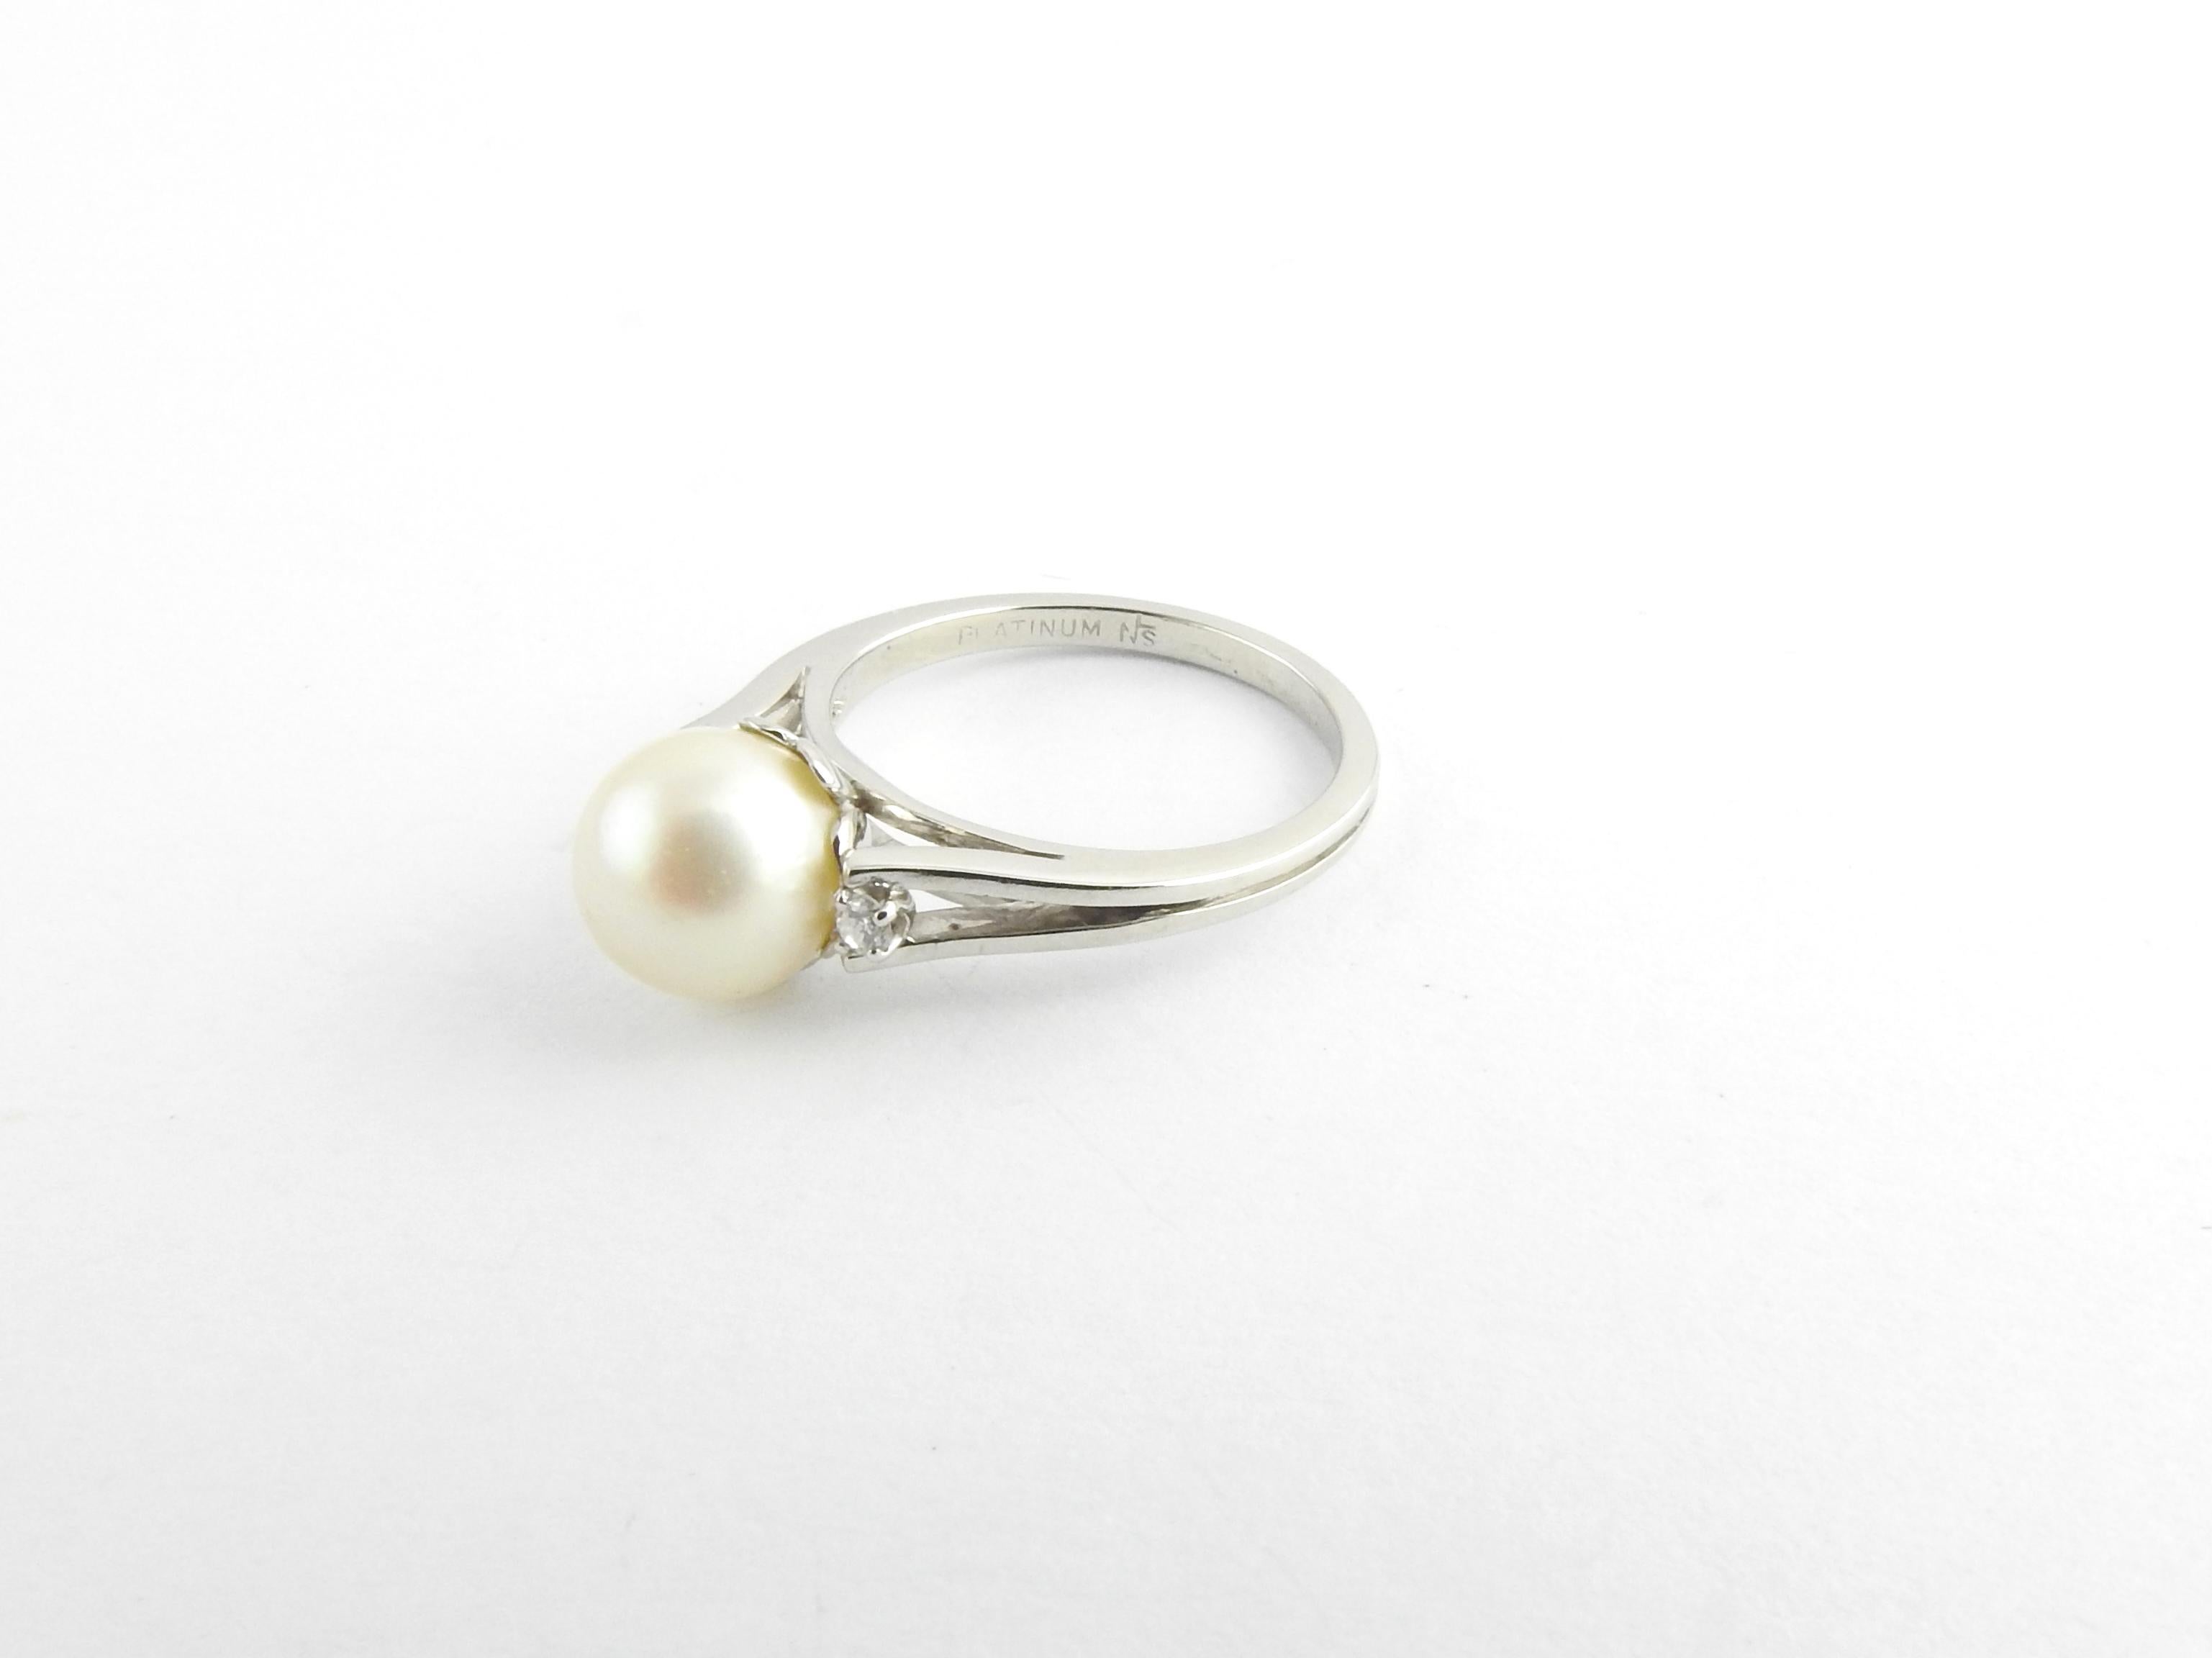 Vintage Platinum Pearl and Diamond Ring Size 5.5

This elegant ring features on cultured pearl 8 mm and two round brilliant cut diamonds set in classic platinum. Shank: 2 mm.

Approximate total diamond weight: .04 ct.

Diamond color: G

Diamond